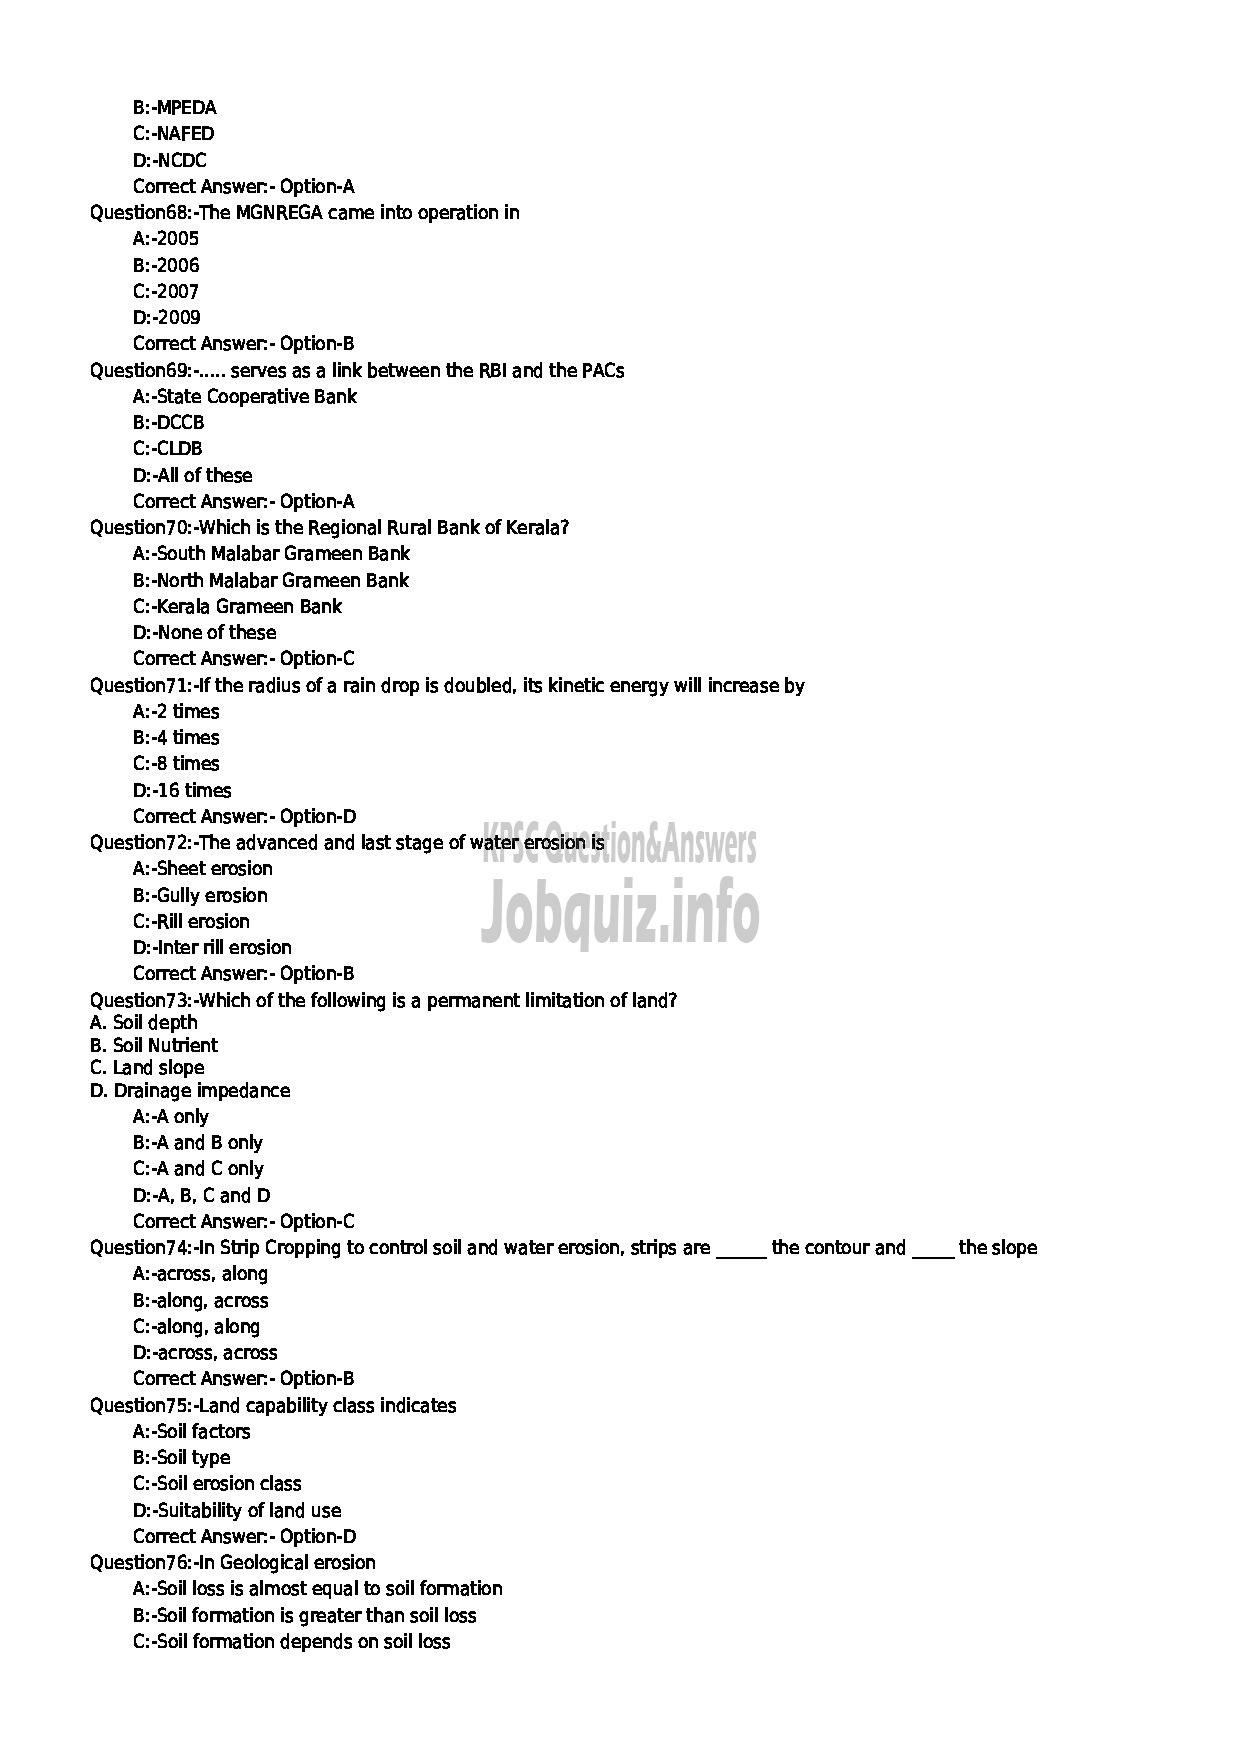 Kerala PSC Question Paper - SPECIALIST (SOIL SCIENCE / SOIL CONSERVATION) KERALA STATE LAND USE BOARD-8